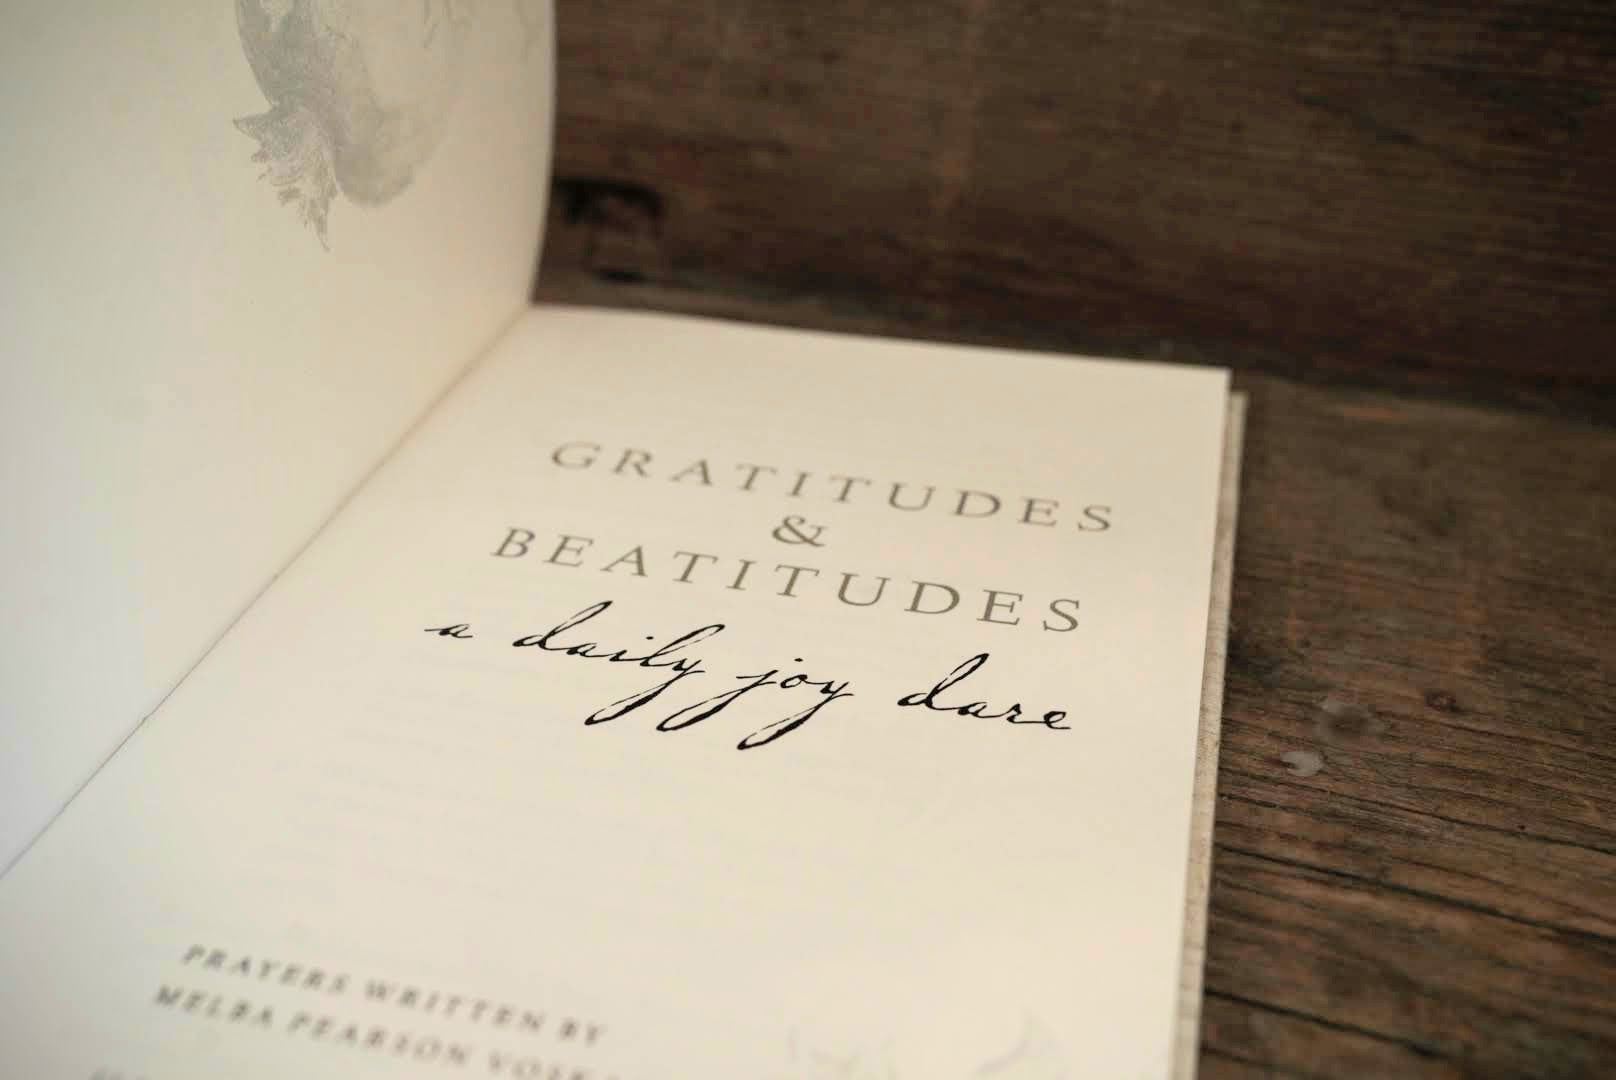 Hardcover, linen-bound Gratitude Journal designed for followers of Ann Voskamp's teachings, incorporating the Sermon on the Mount for daily reflections and gratitude, featuring artwork by Katy Rose. One Thousand Gifts Gratitude Journal